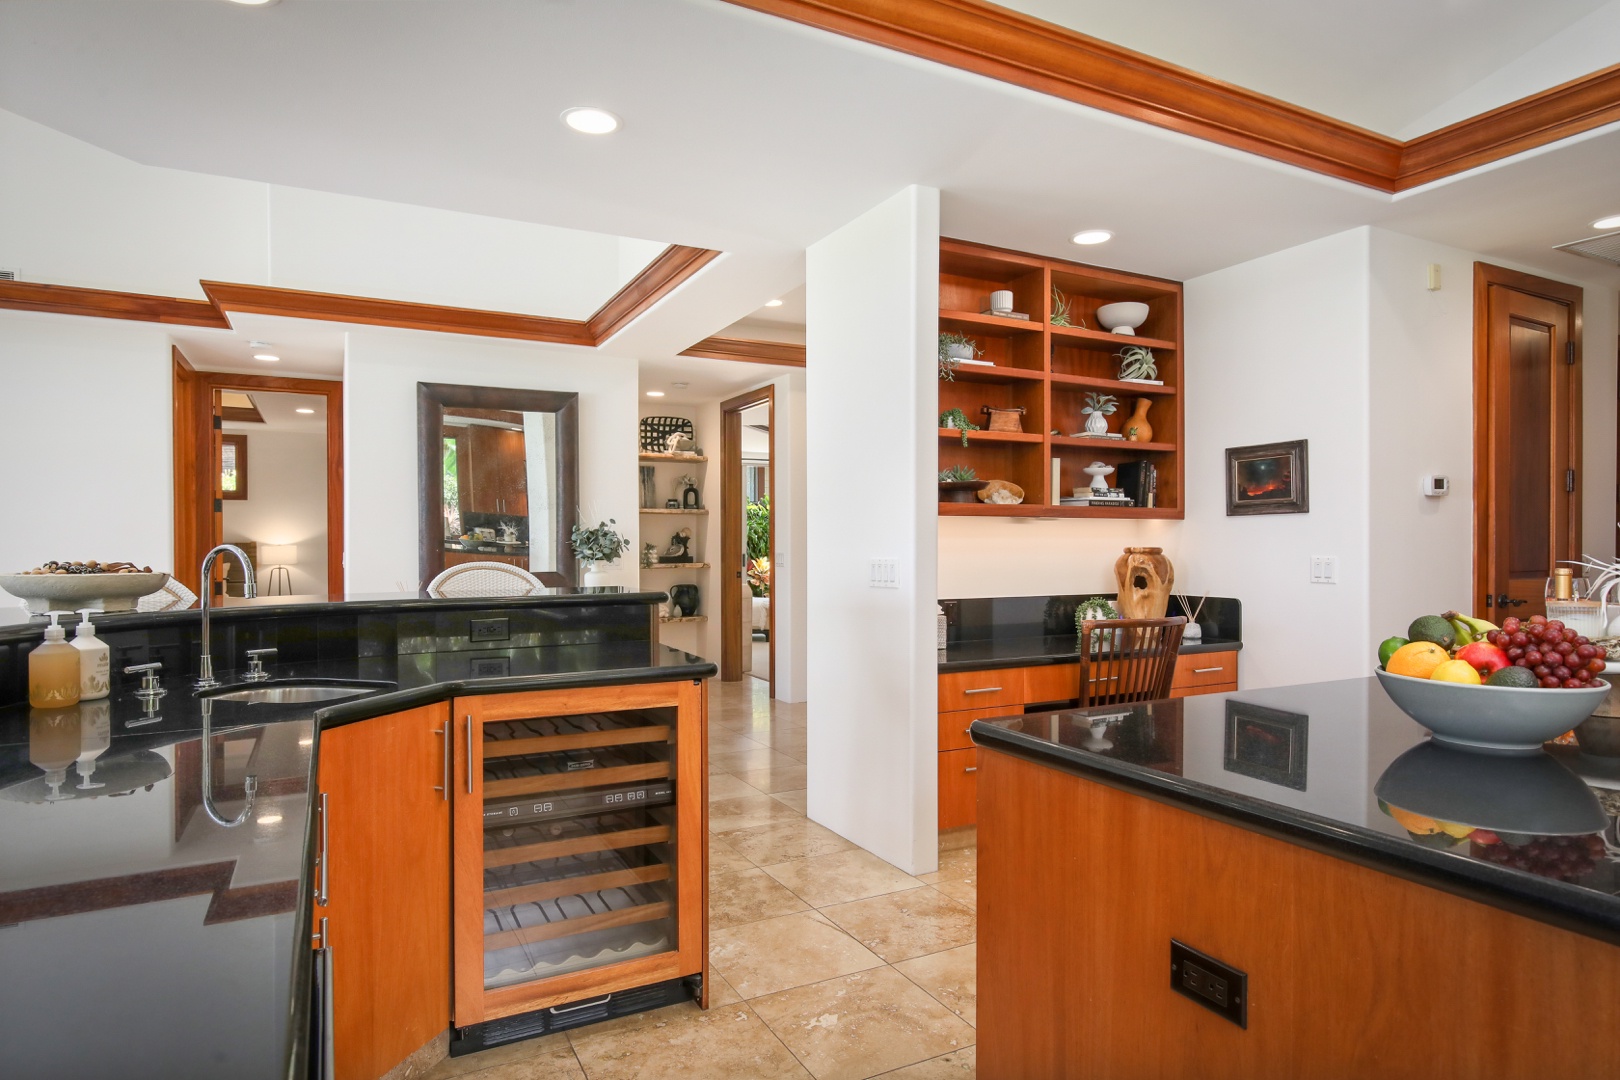 Kailua Kona Vacation Rentals, 4BD Pakui Street (147) Estate Home at Four Seasons Resort at Hualalai - Wine fridge and other top tier amenities in this professionally managed home.